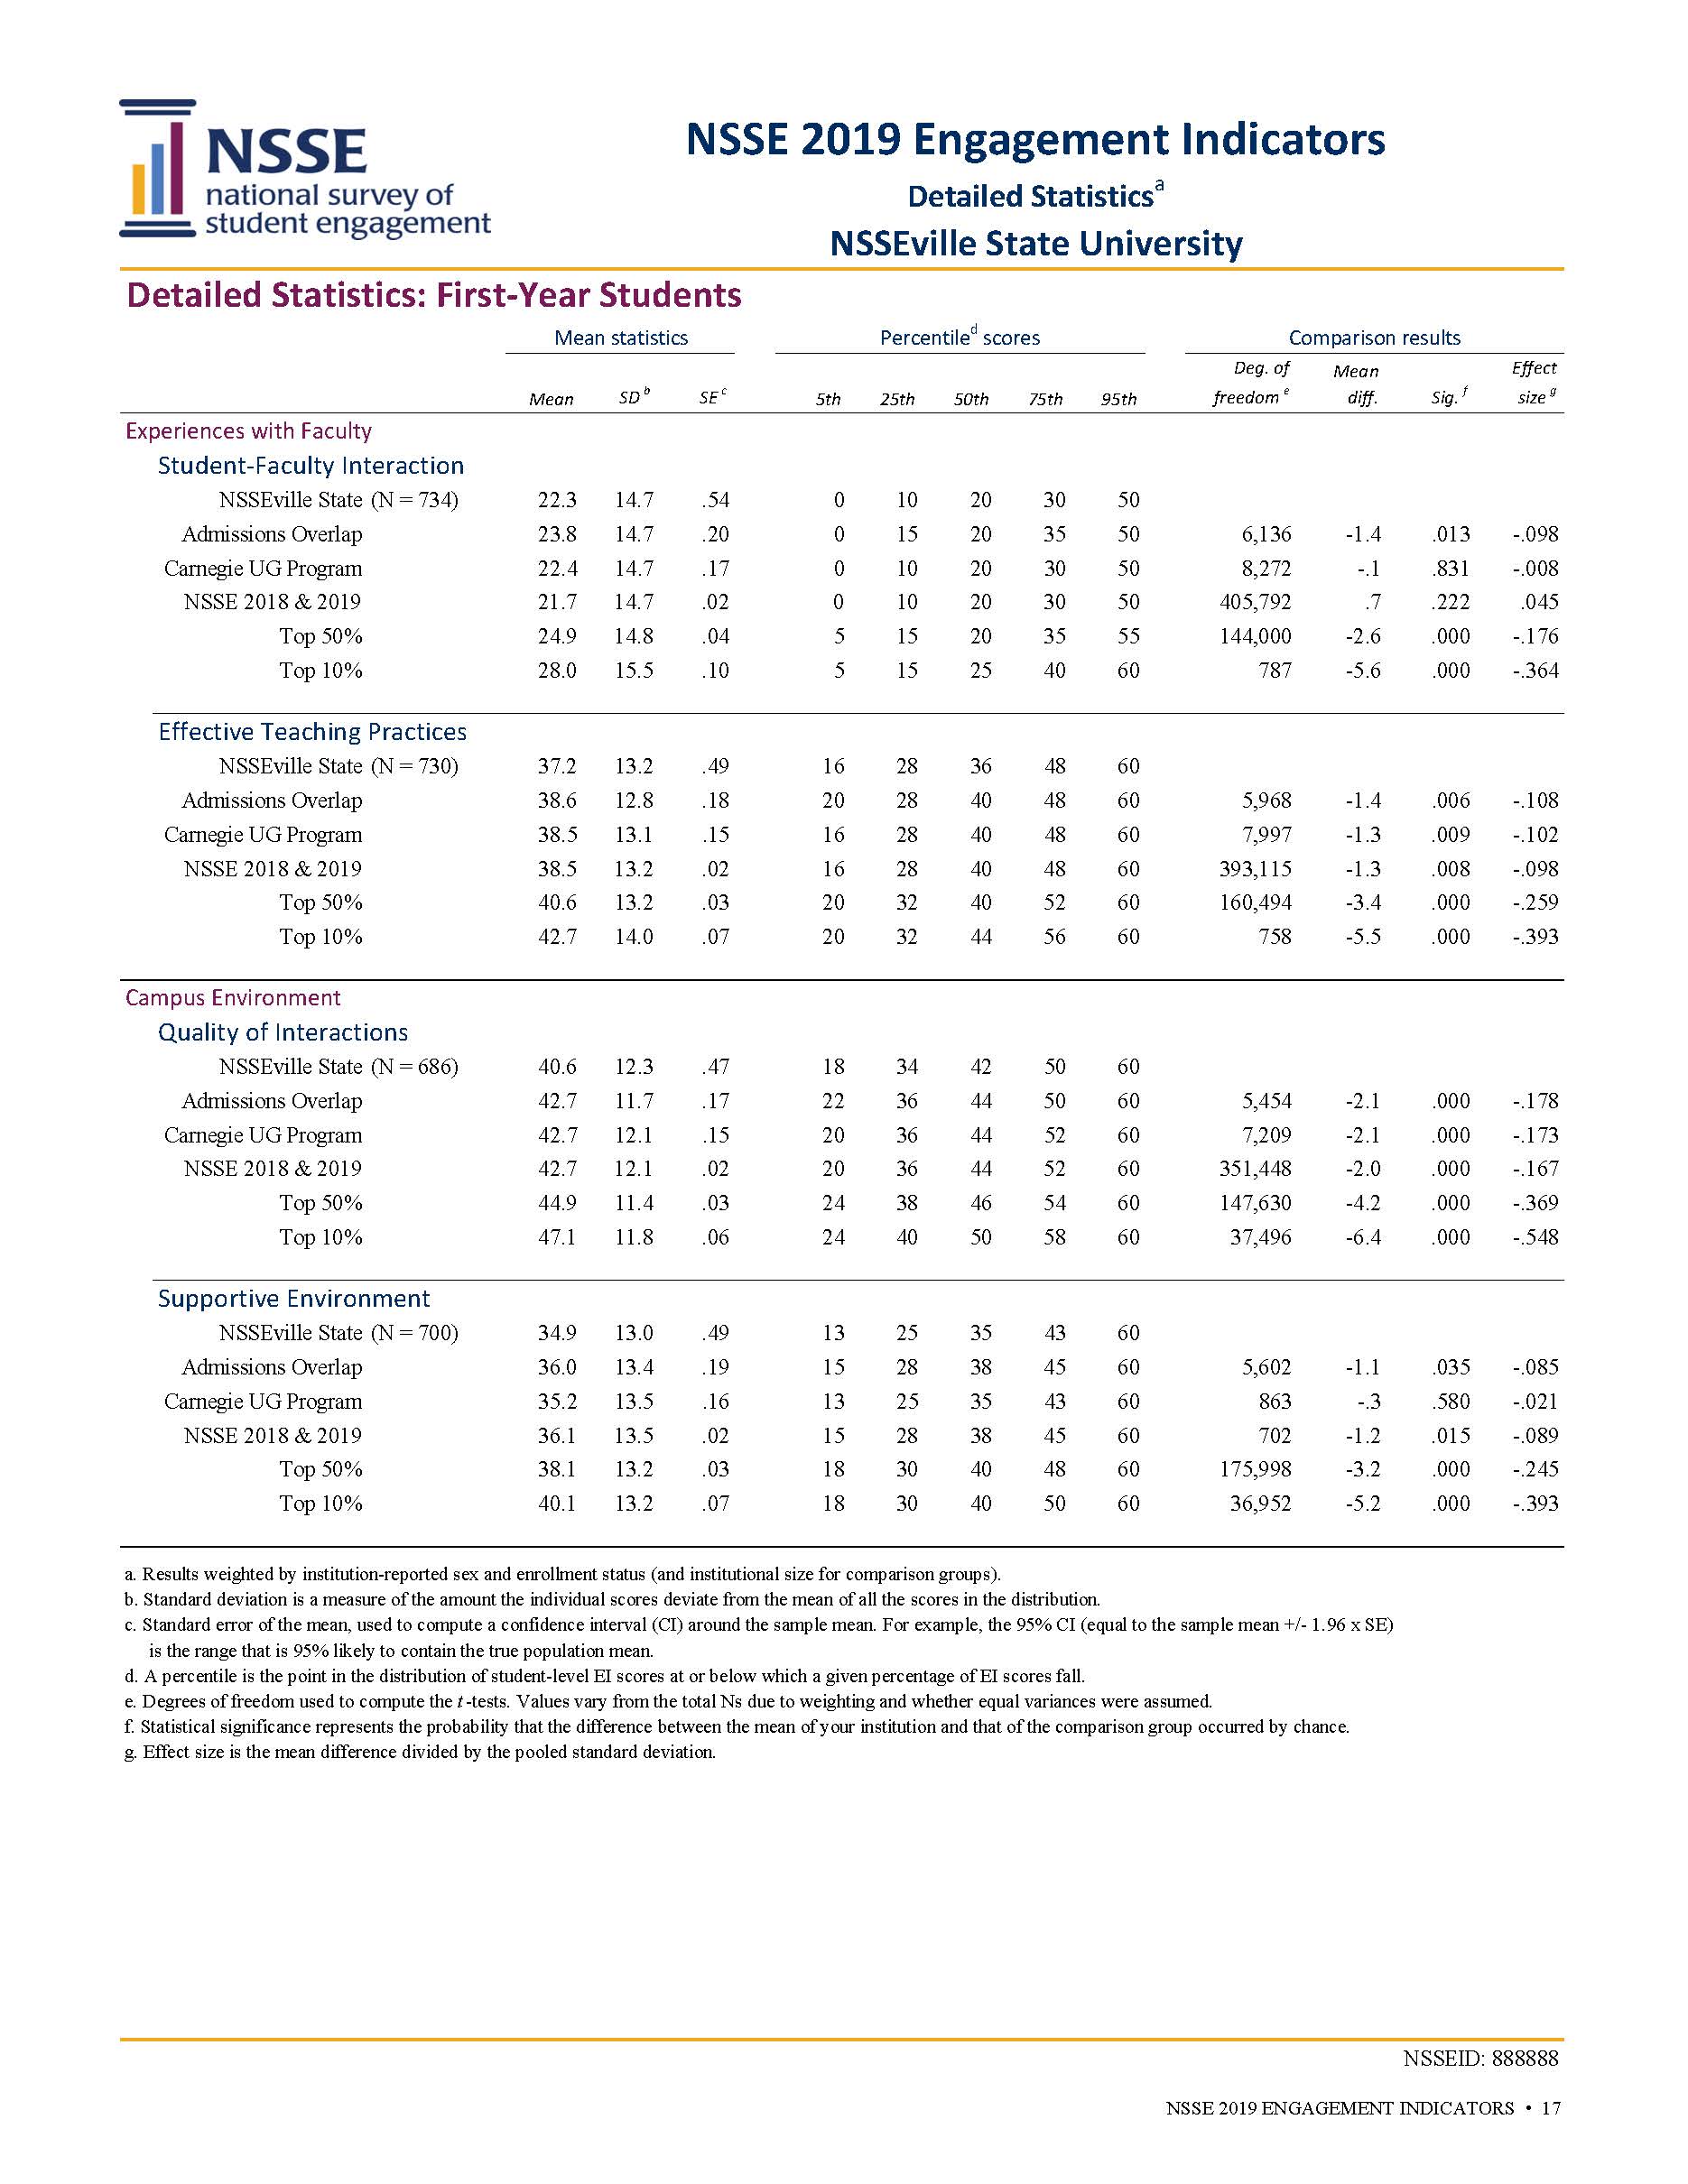 Sample Report: page 17 of NSSE Engagement Indicators